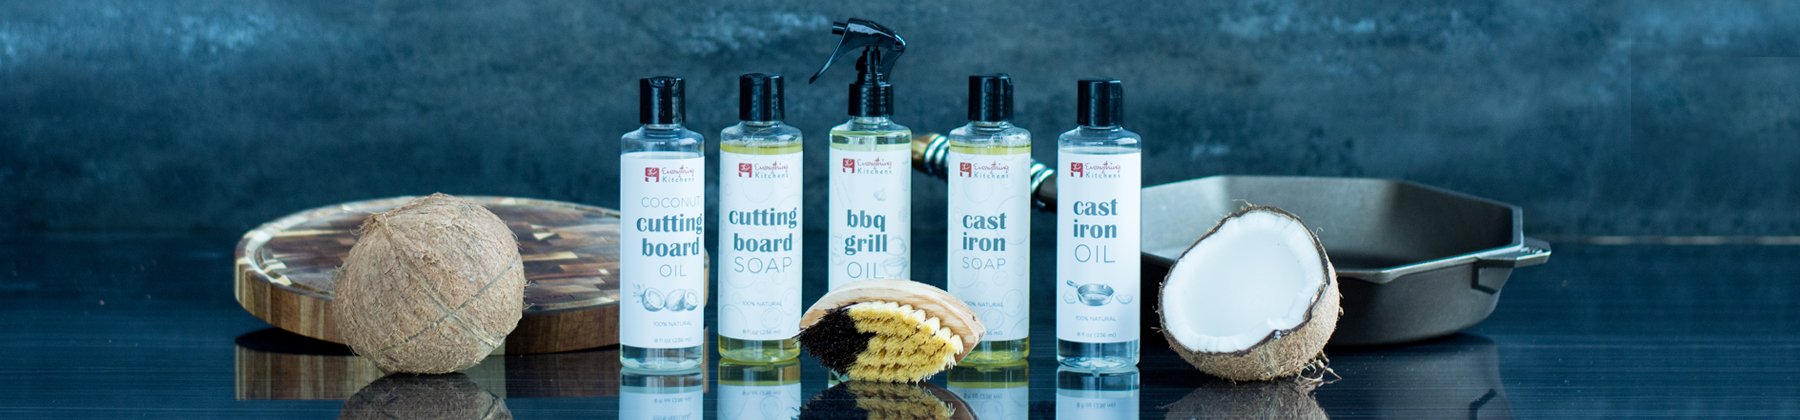 Photo of Everything Kitchens exclusive cleaning supplies, cutting board oil, and other soaps.